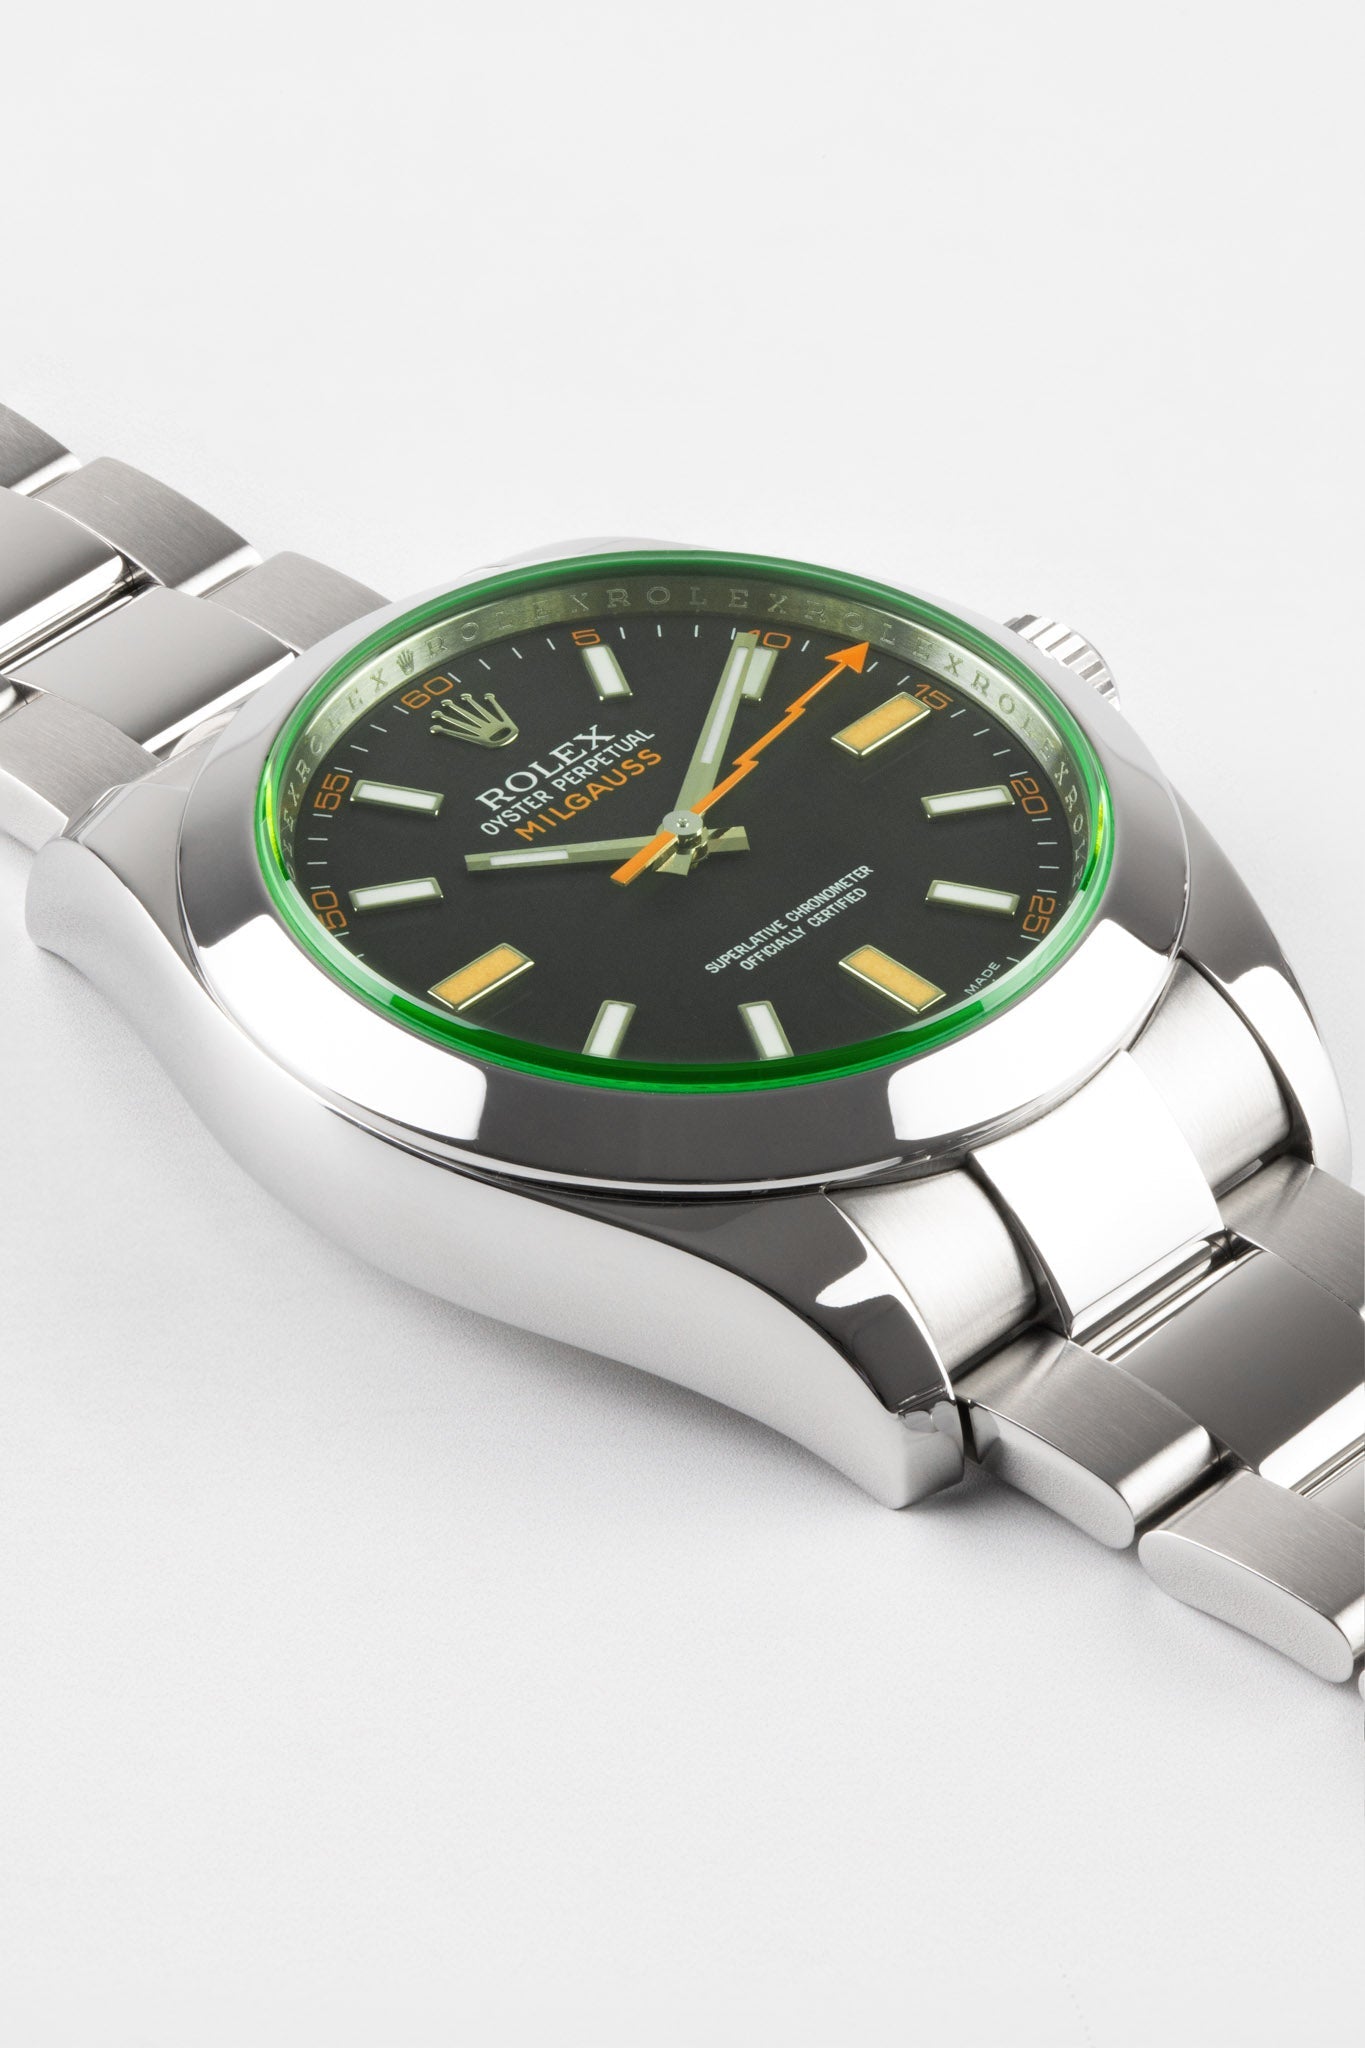 Rolex 116400GV Milgauss 40mm Automatic Watch | Obsessed By Watches